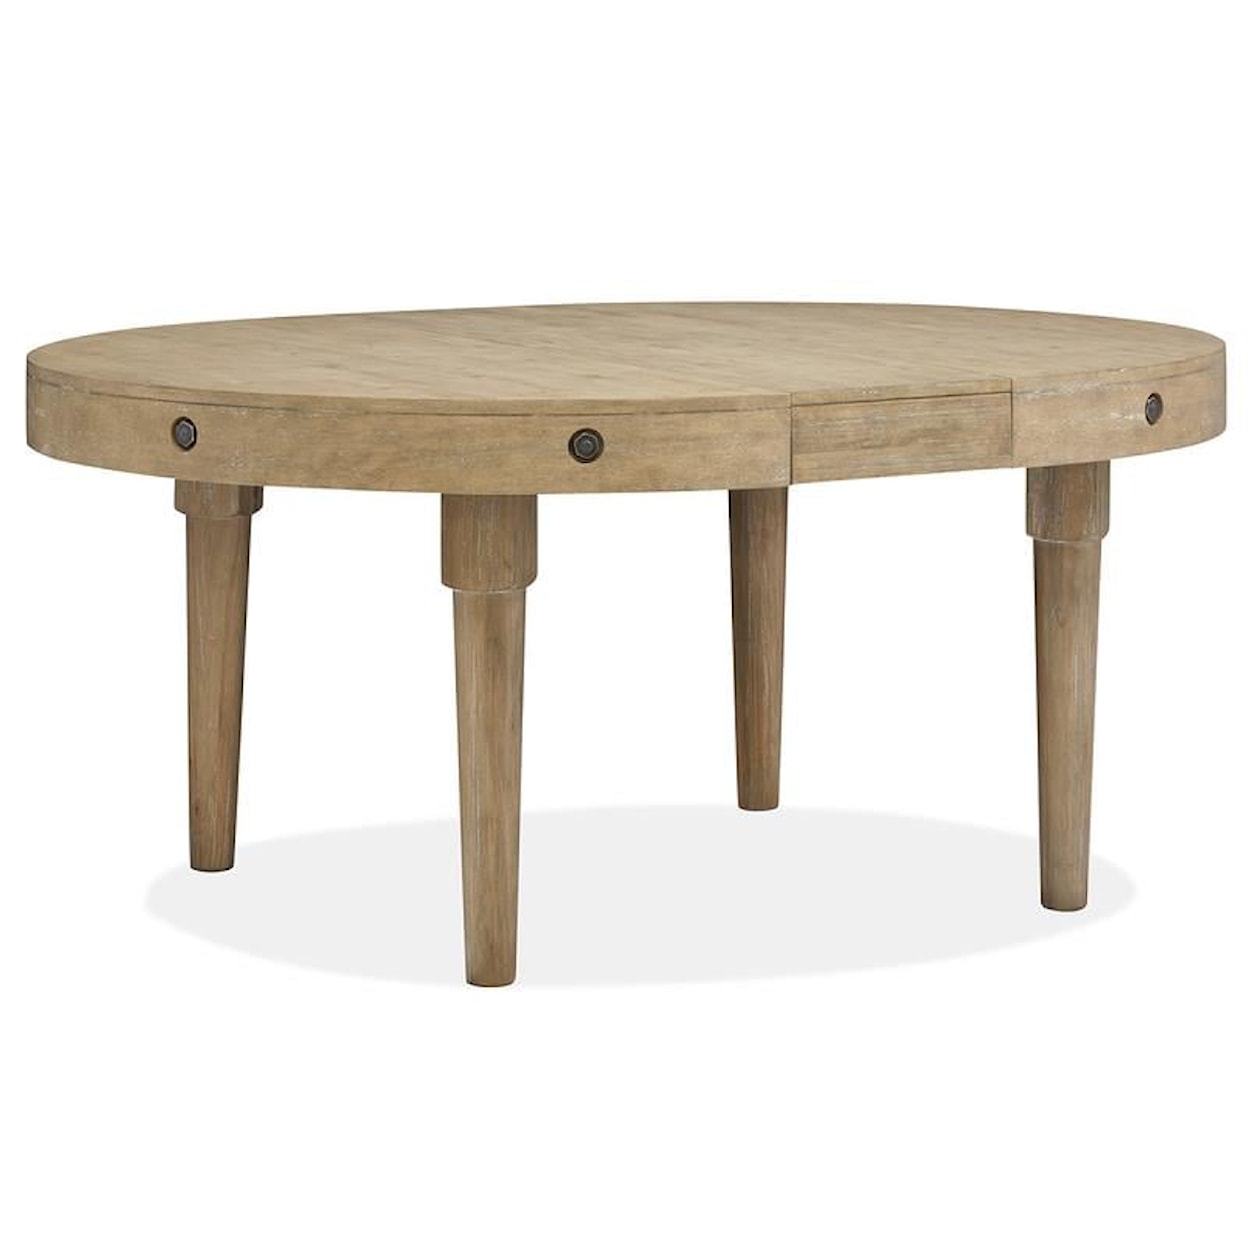 Belfort Select Glenmore Round Dining Table